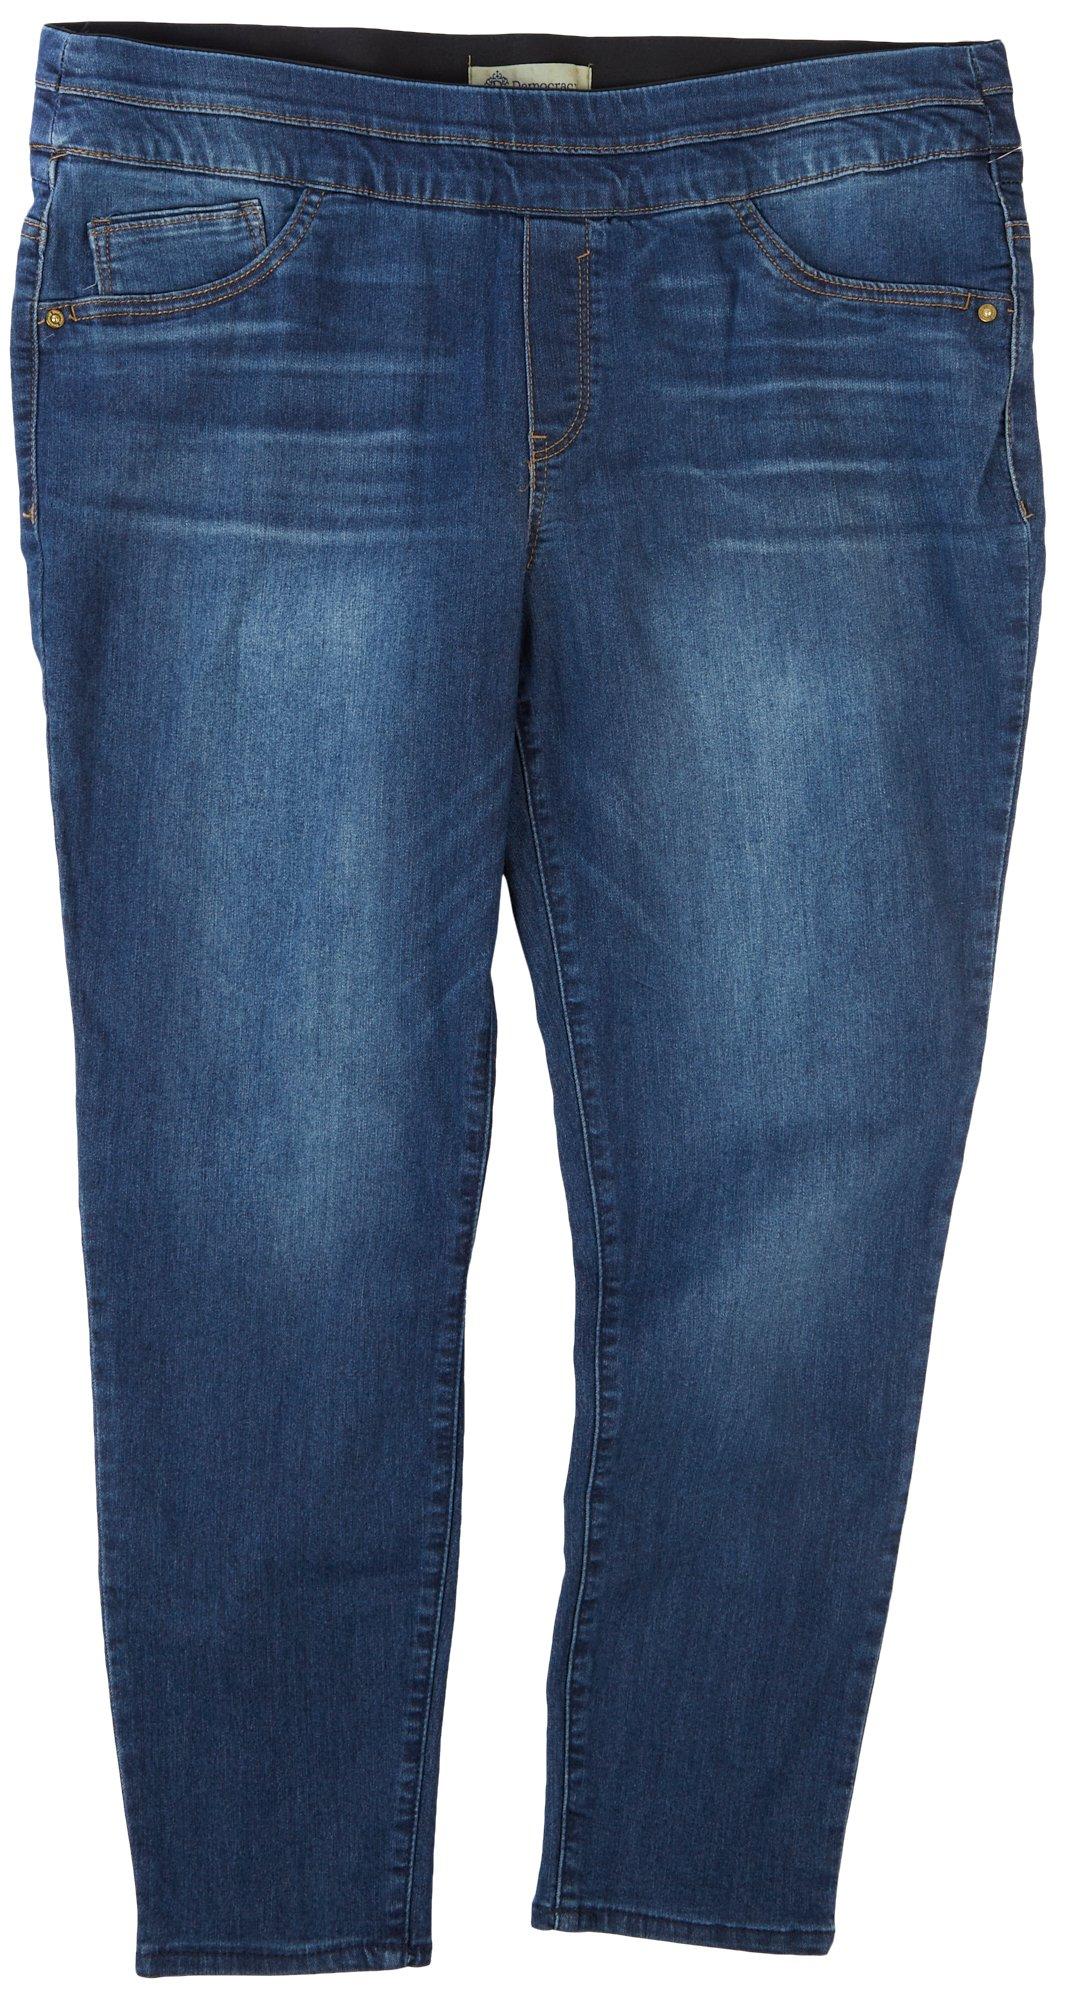 Womens 27 in. Ab-Tech Pull-On Jeans